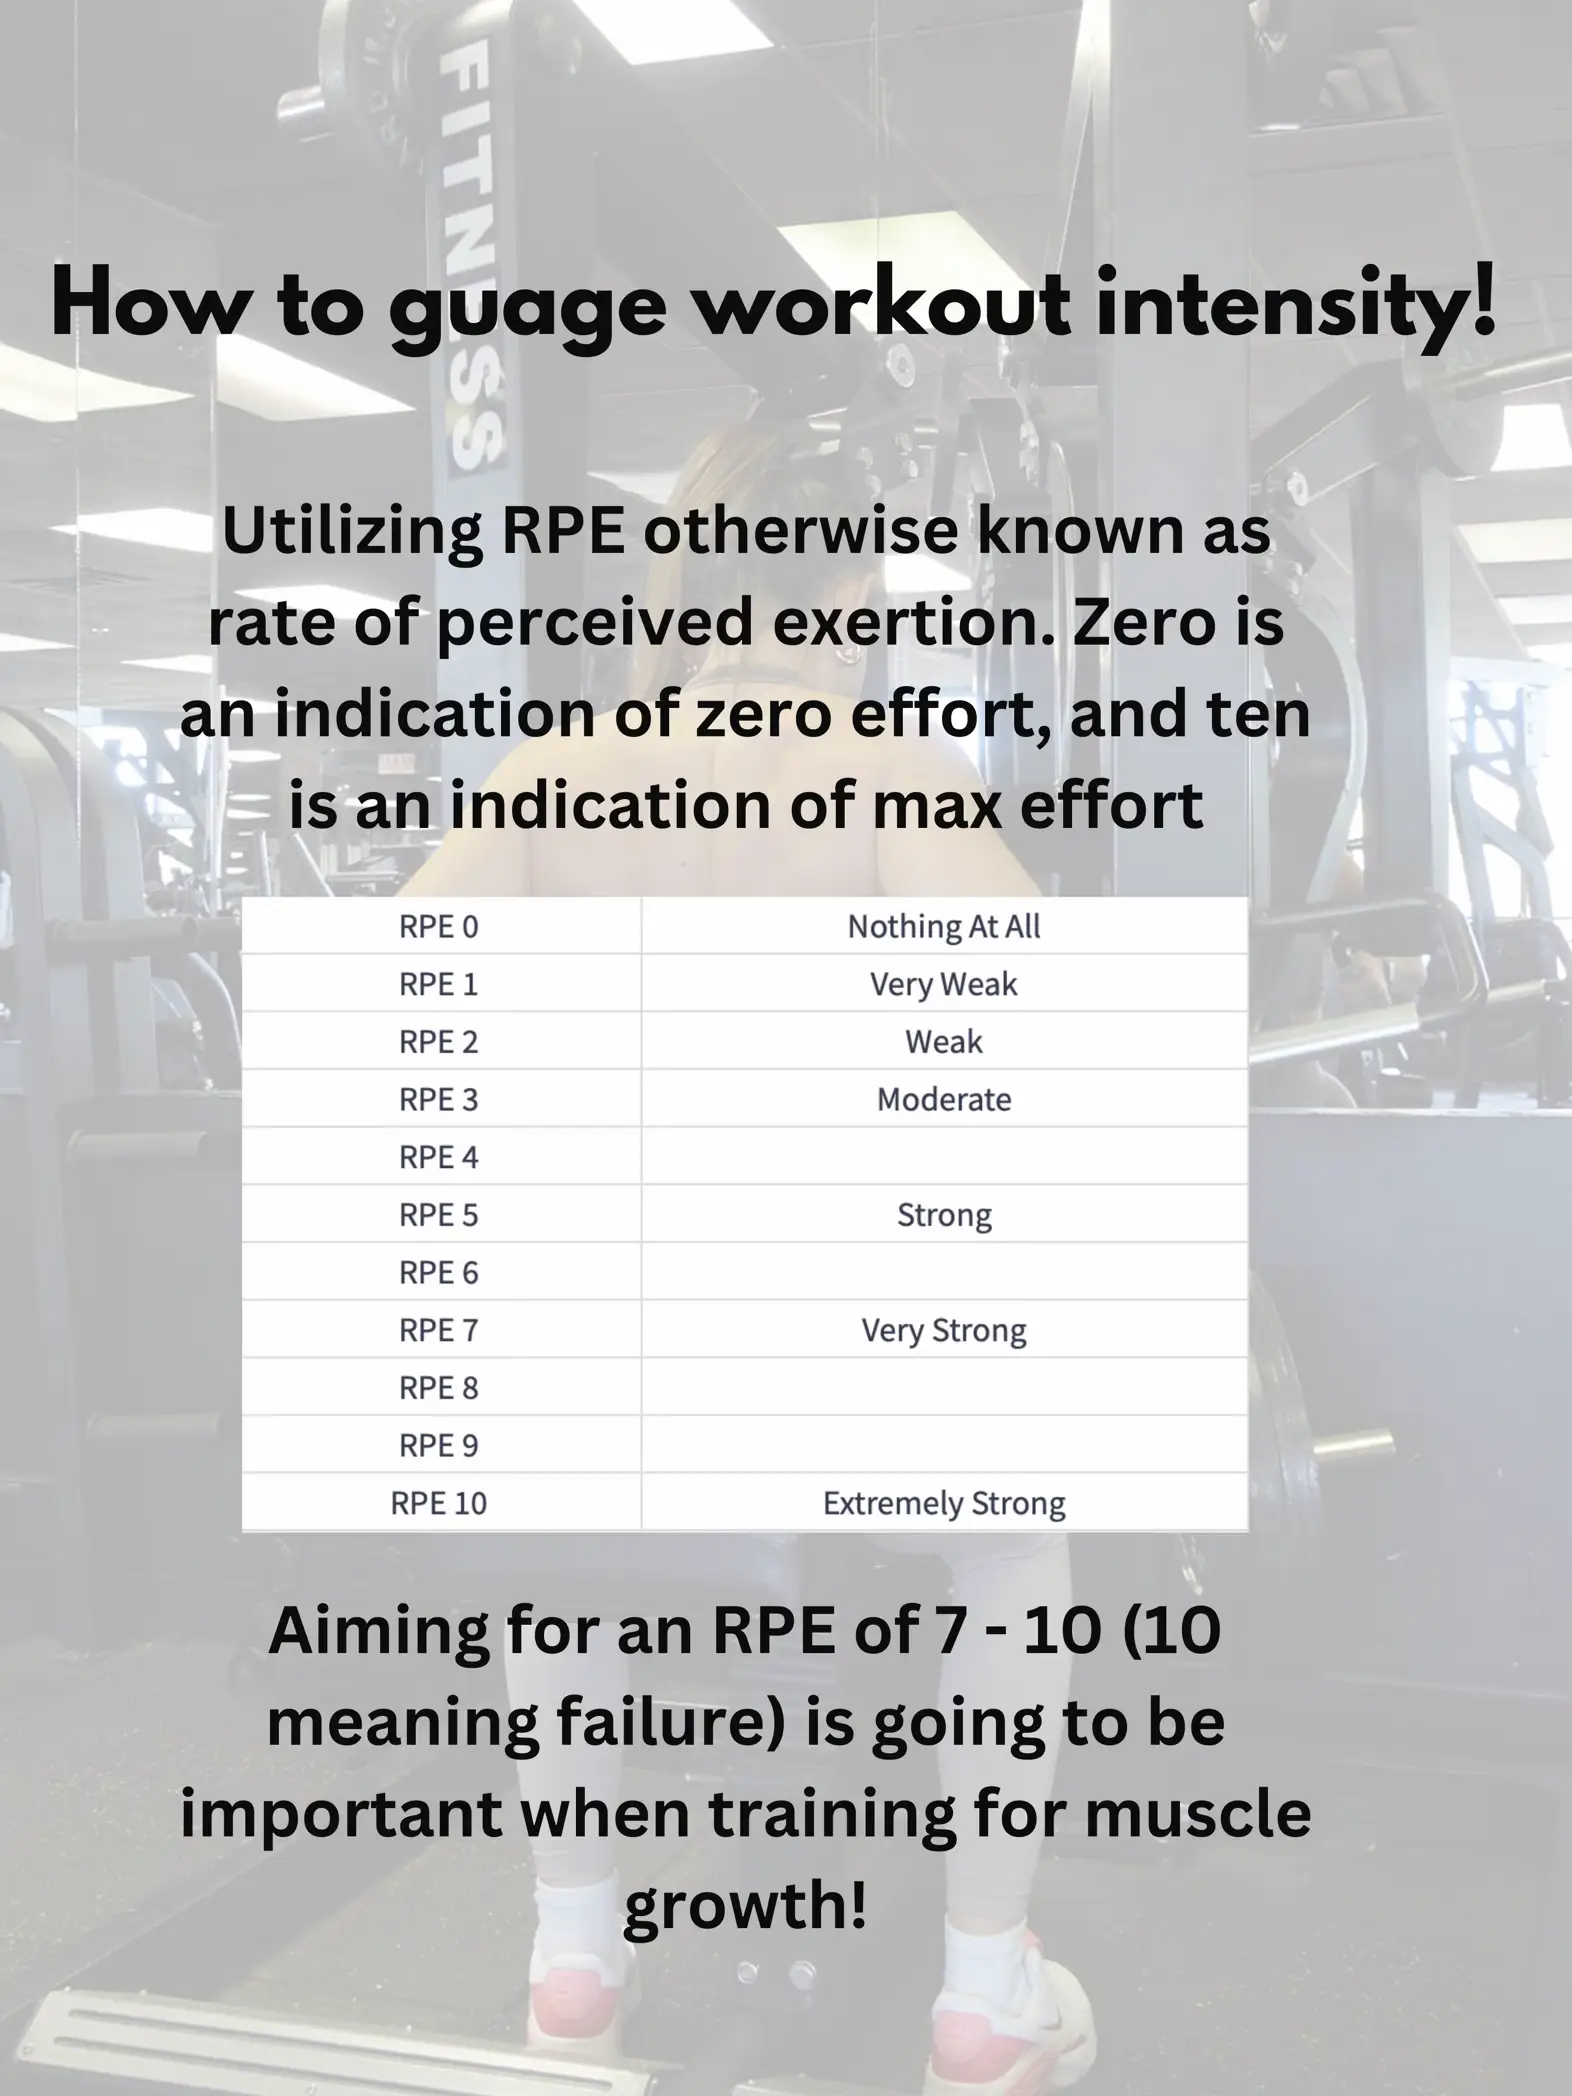 Why is Exercise Intensity Important?